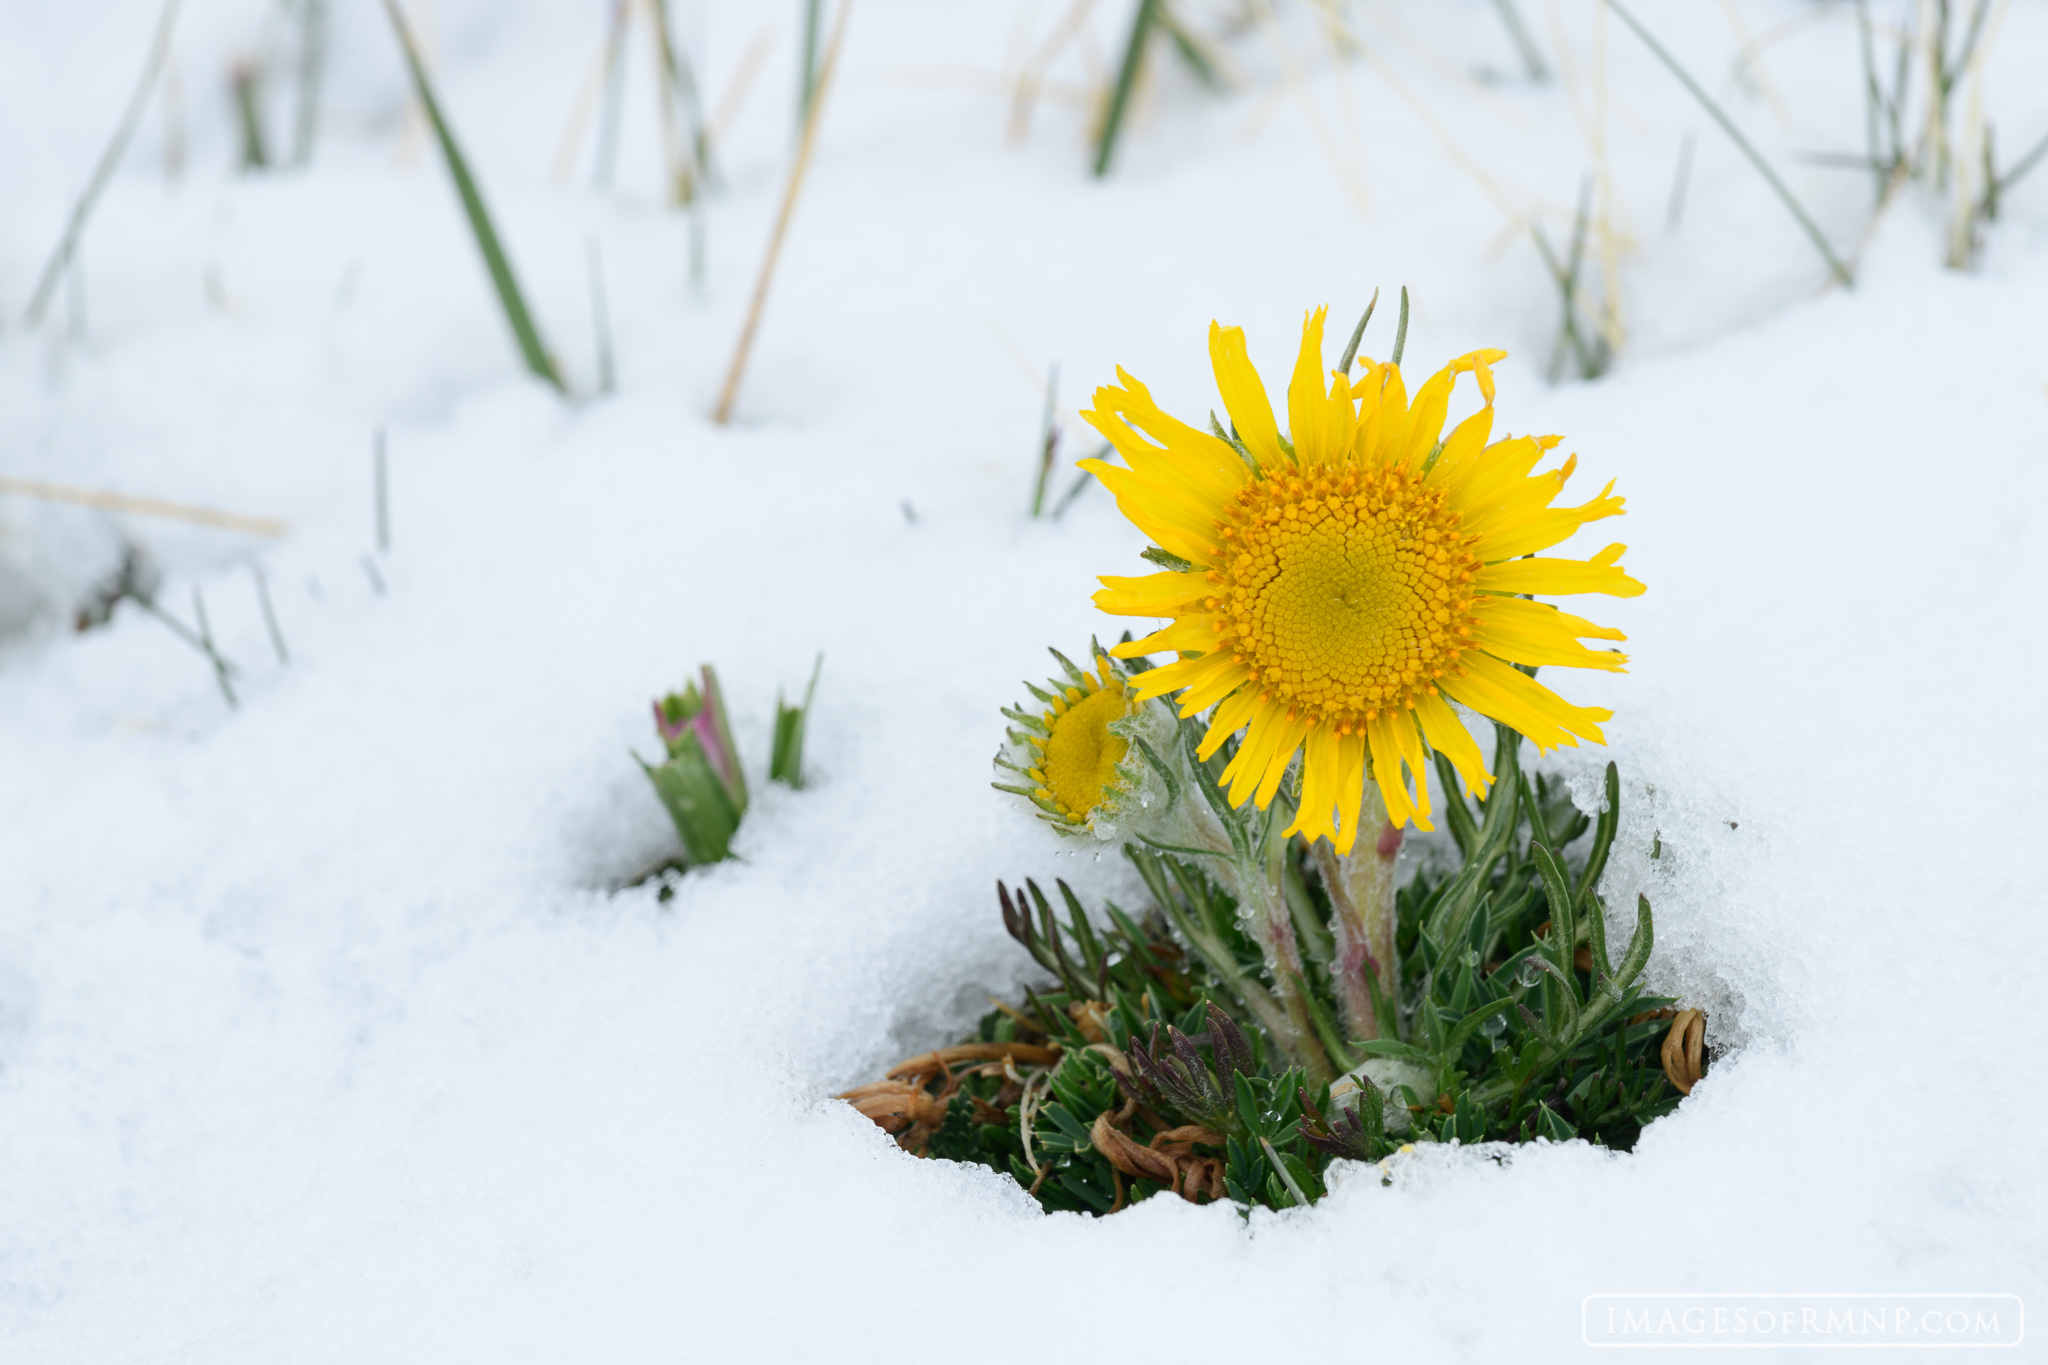 Just as the alpine sunflowers began to appear in the tundra of Rocky Mountain National Park a snowstorm blew in covering the...